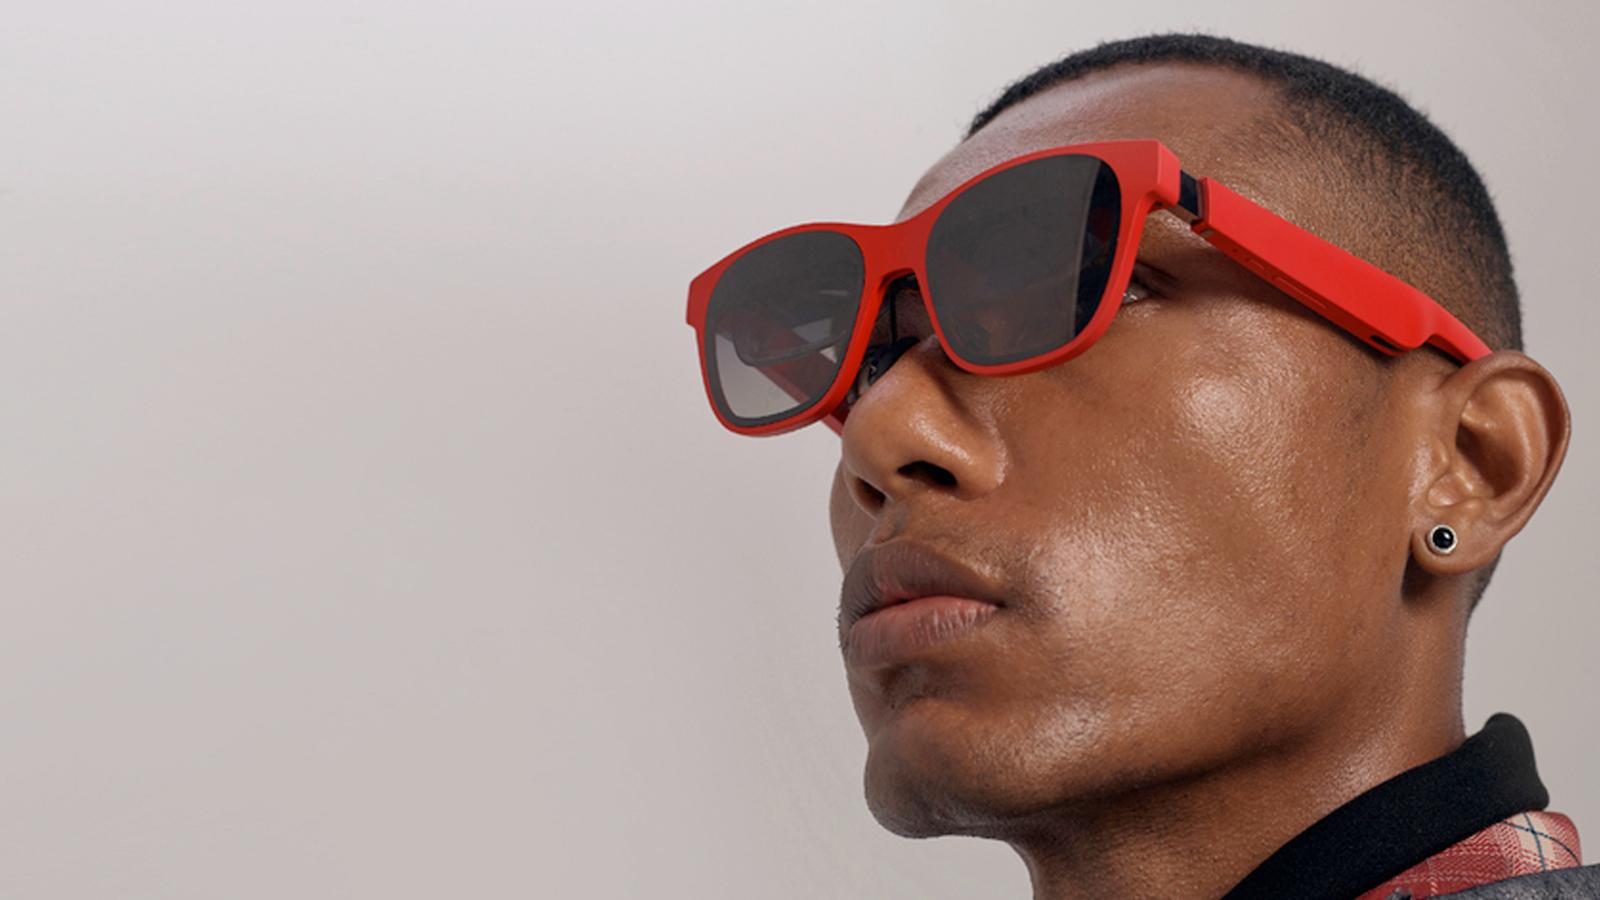 Nreal Air sunglasses let you watch TV in AR